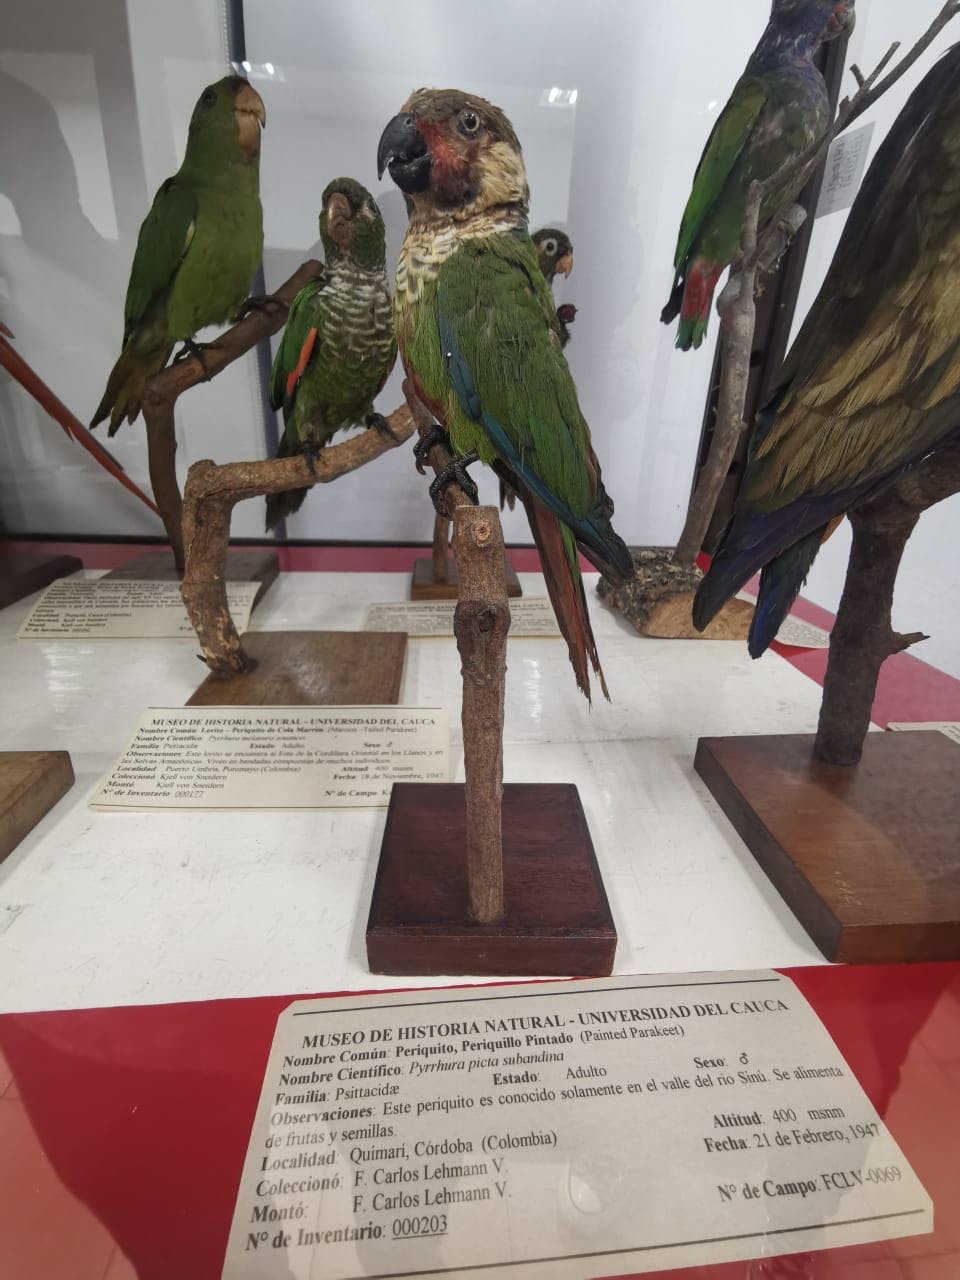 Sinú Parakeet specimen in the Cauca Museum. There are no known photos of a Sinú Parakeet in the wild. (Photo by Fernado Ayerbe)

